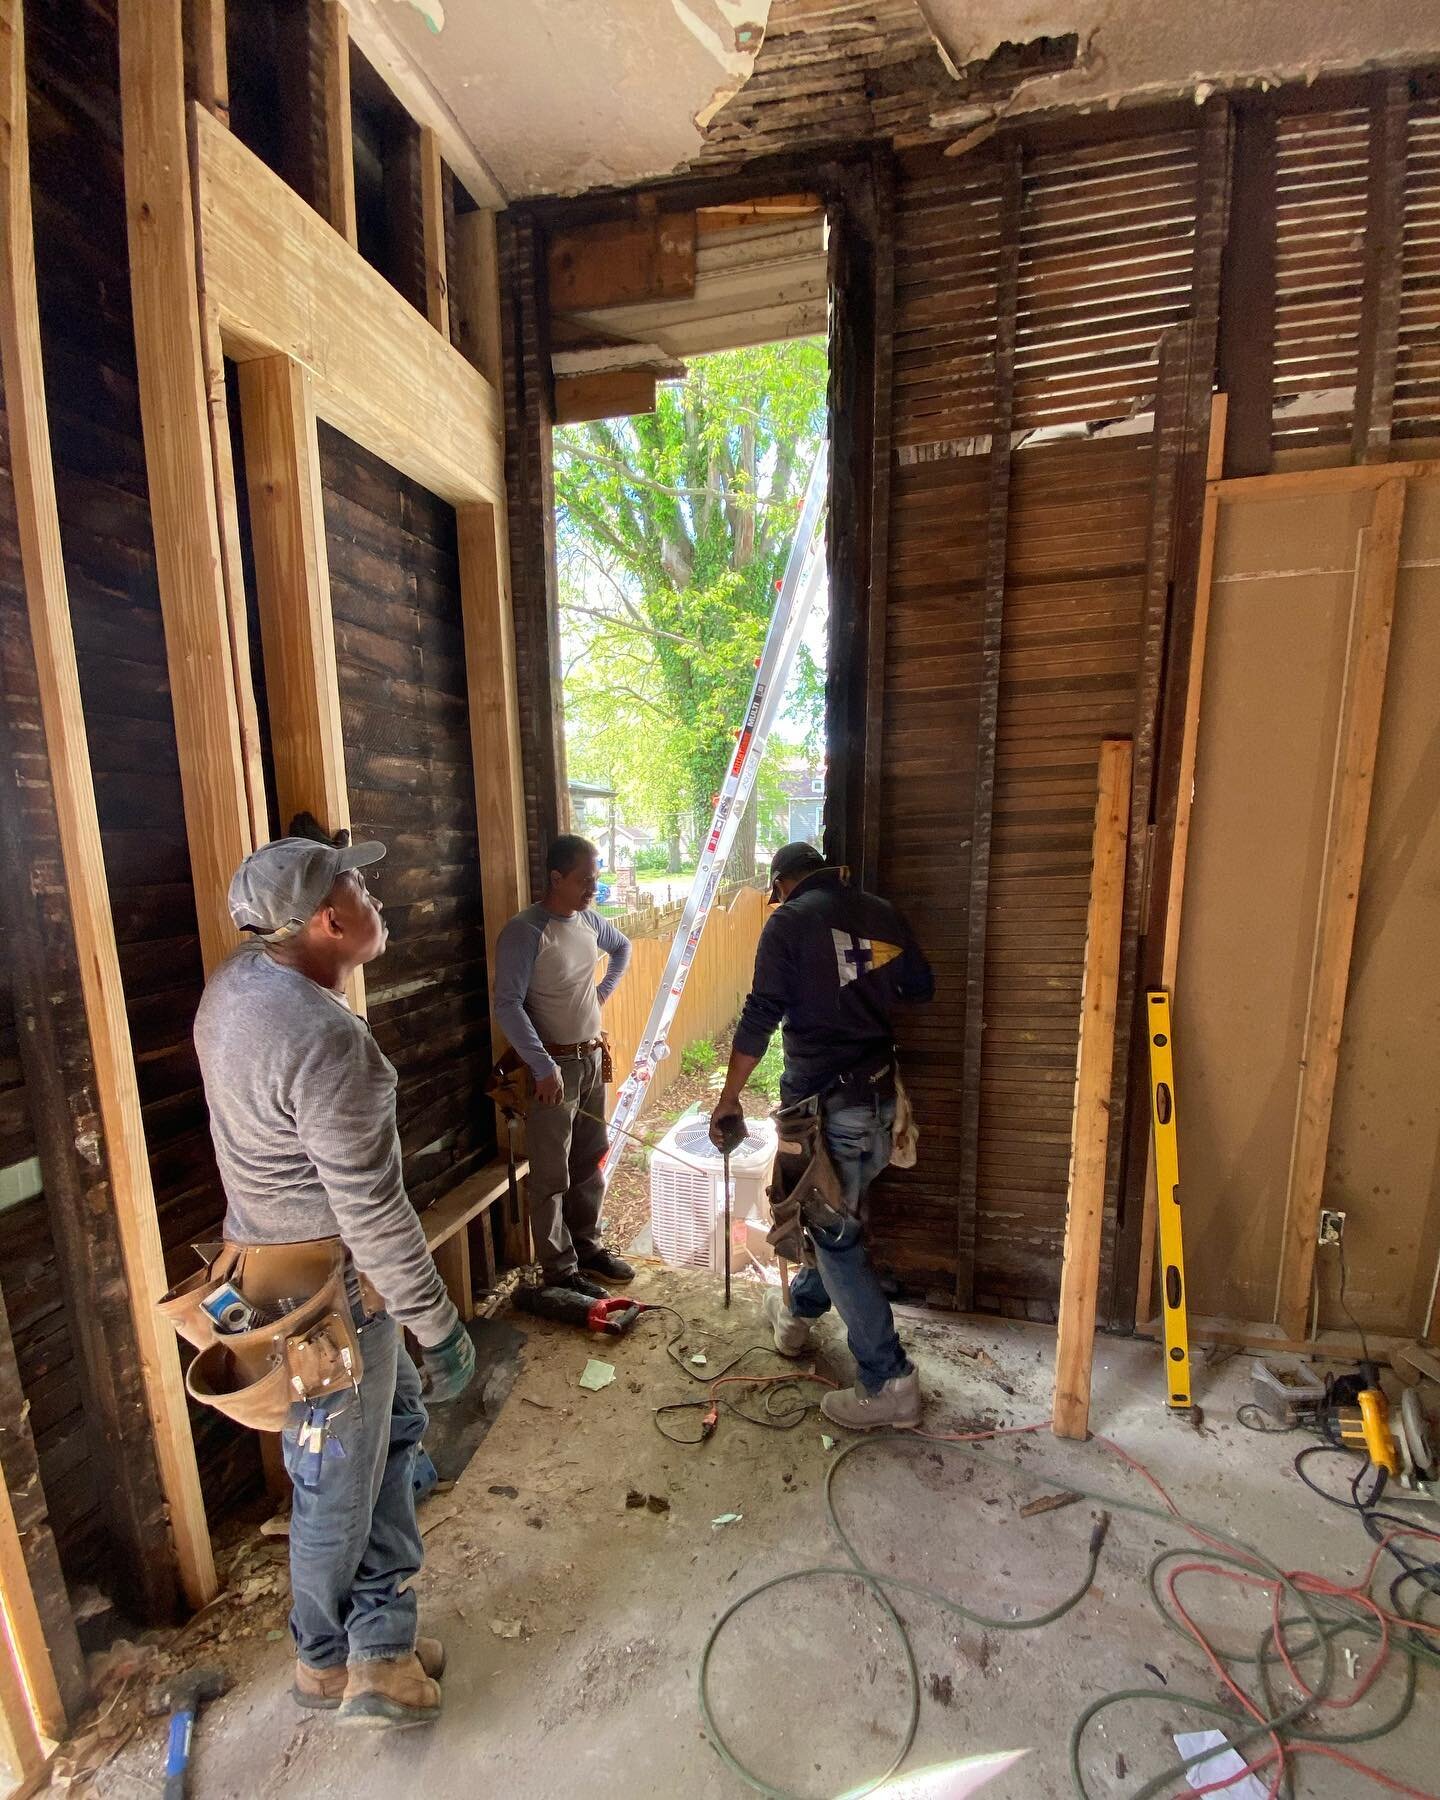 When you find a rotted wall you have to improvise. Cutting out a section of exterior wall is no simple job, but is important to the integrity of the house and our build quality. 

Good news is we got the new windows framed and the old French doors ou